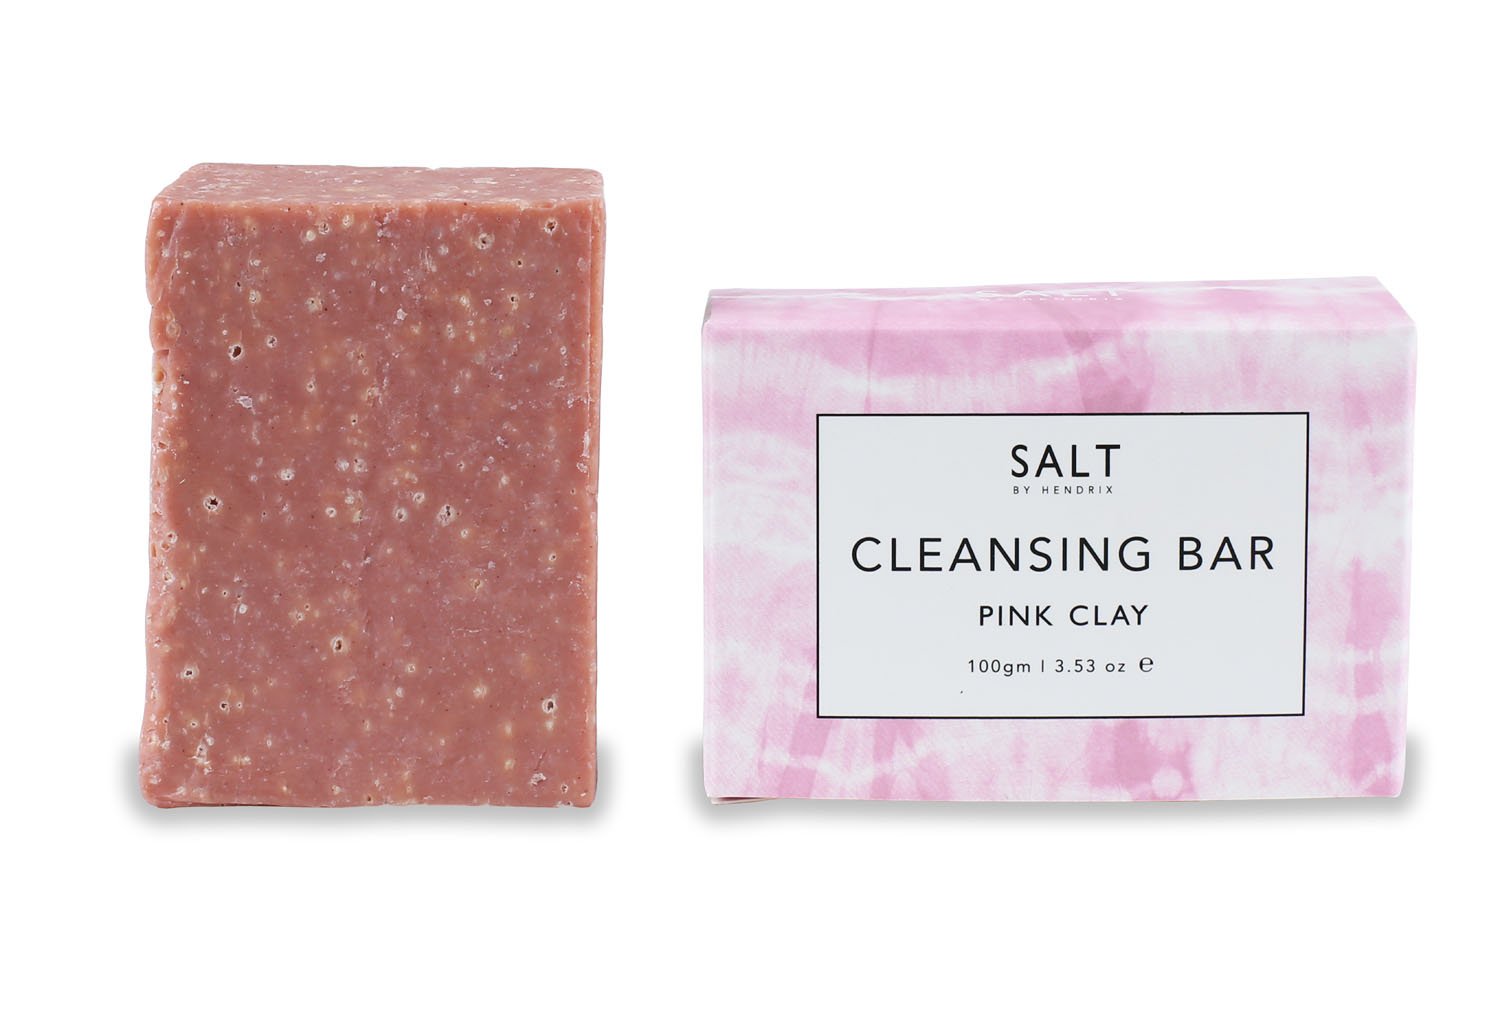 Salt By Hendrix pink clay cleansing bar, $16, from The Tonic Room